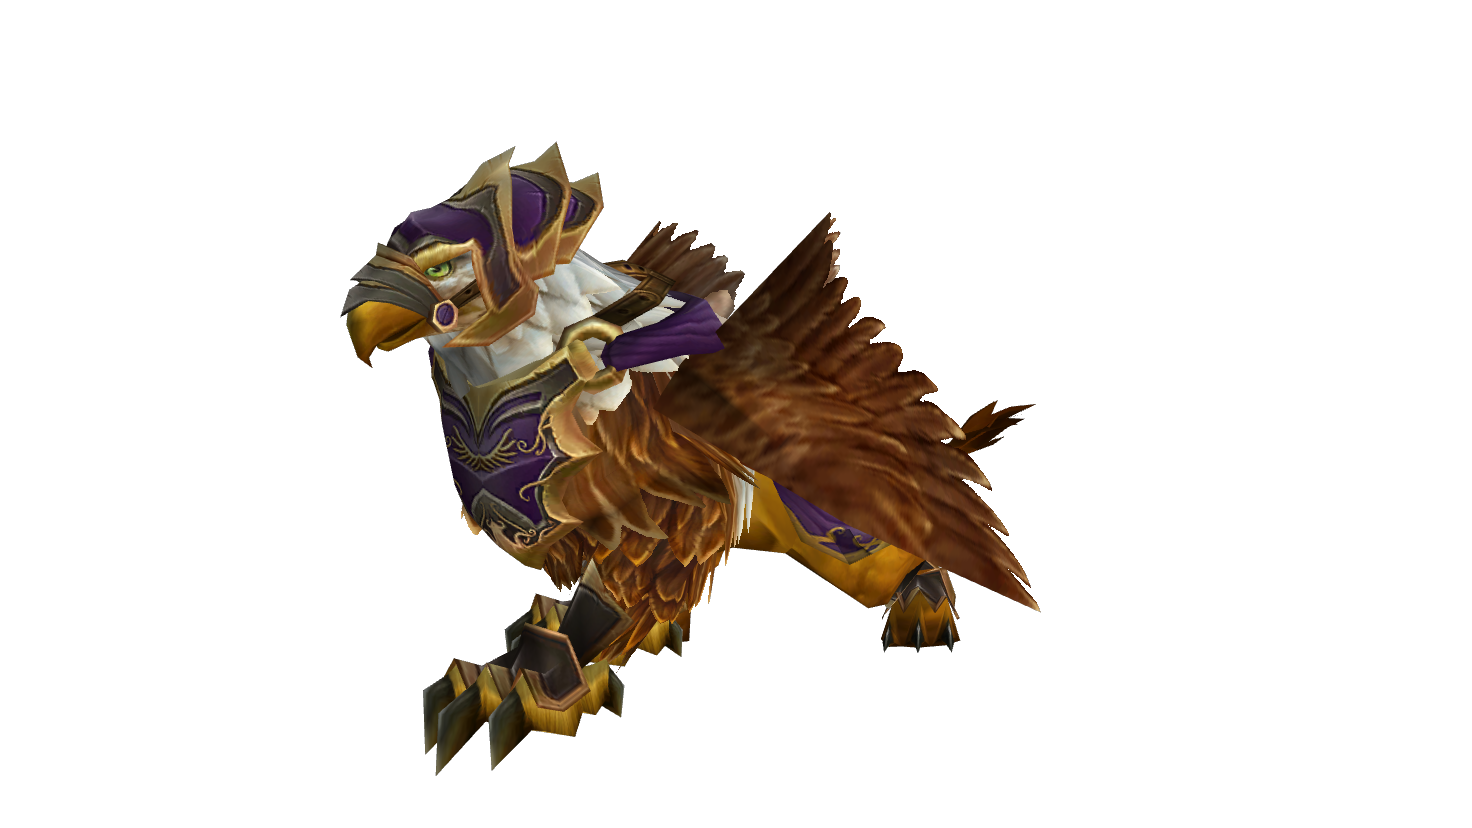 WoW Classic TBC: How Much Does Flying Cost In Outland